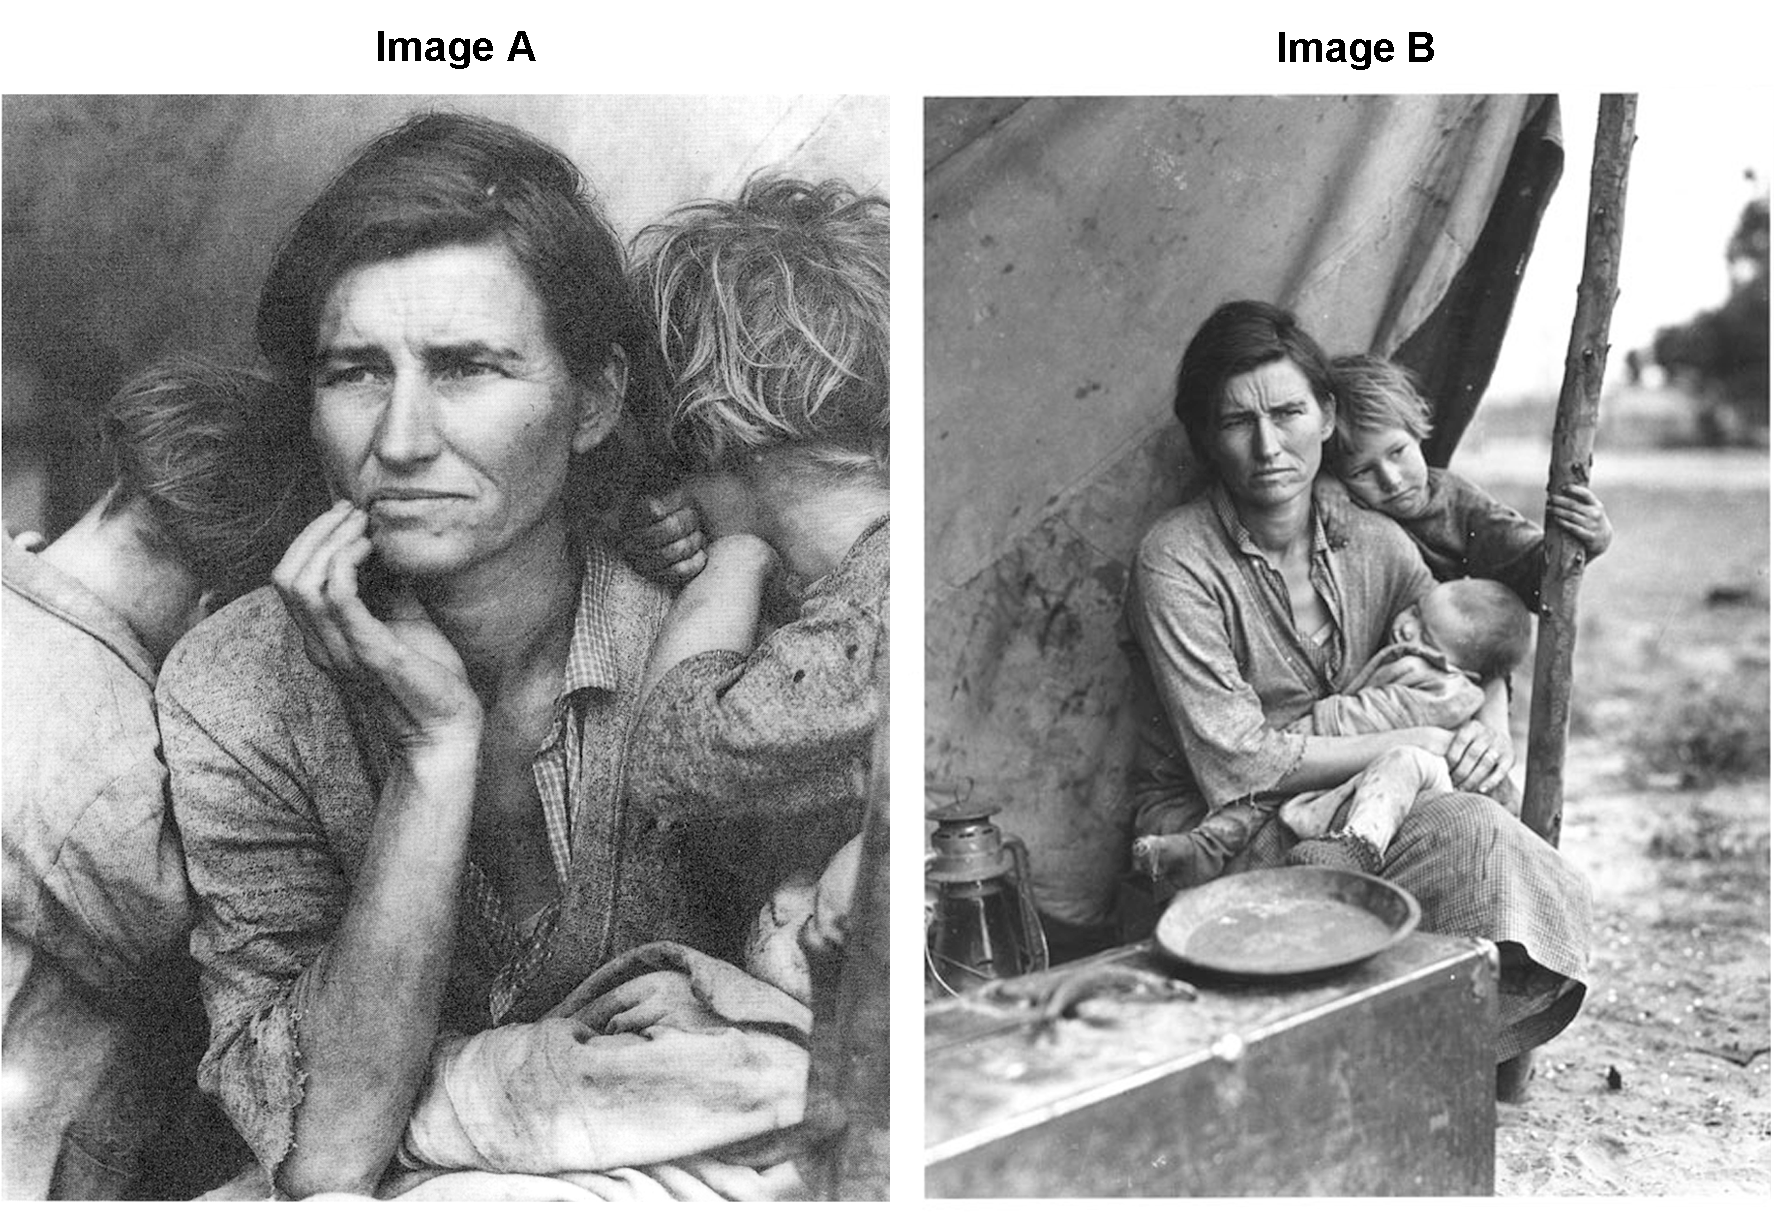 two black and white photographs shown side by side of the same Depression-era family